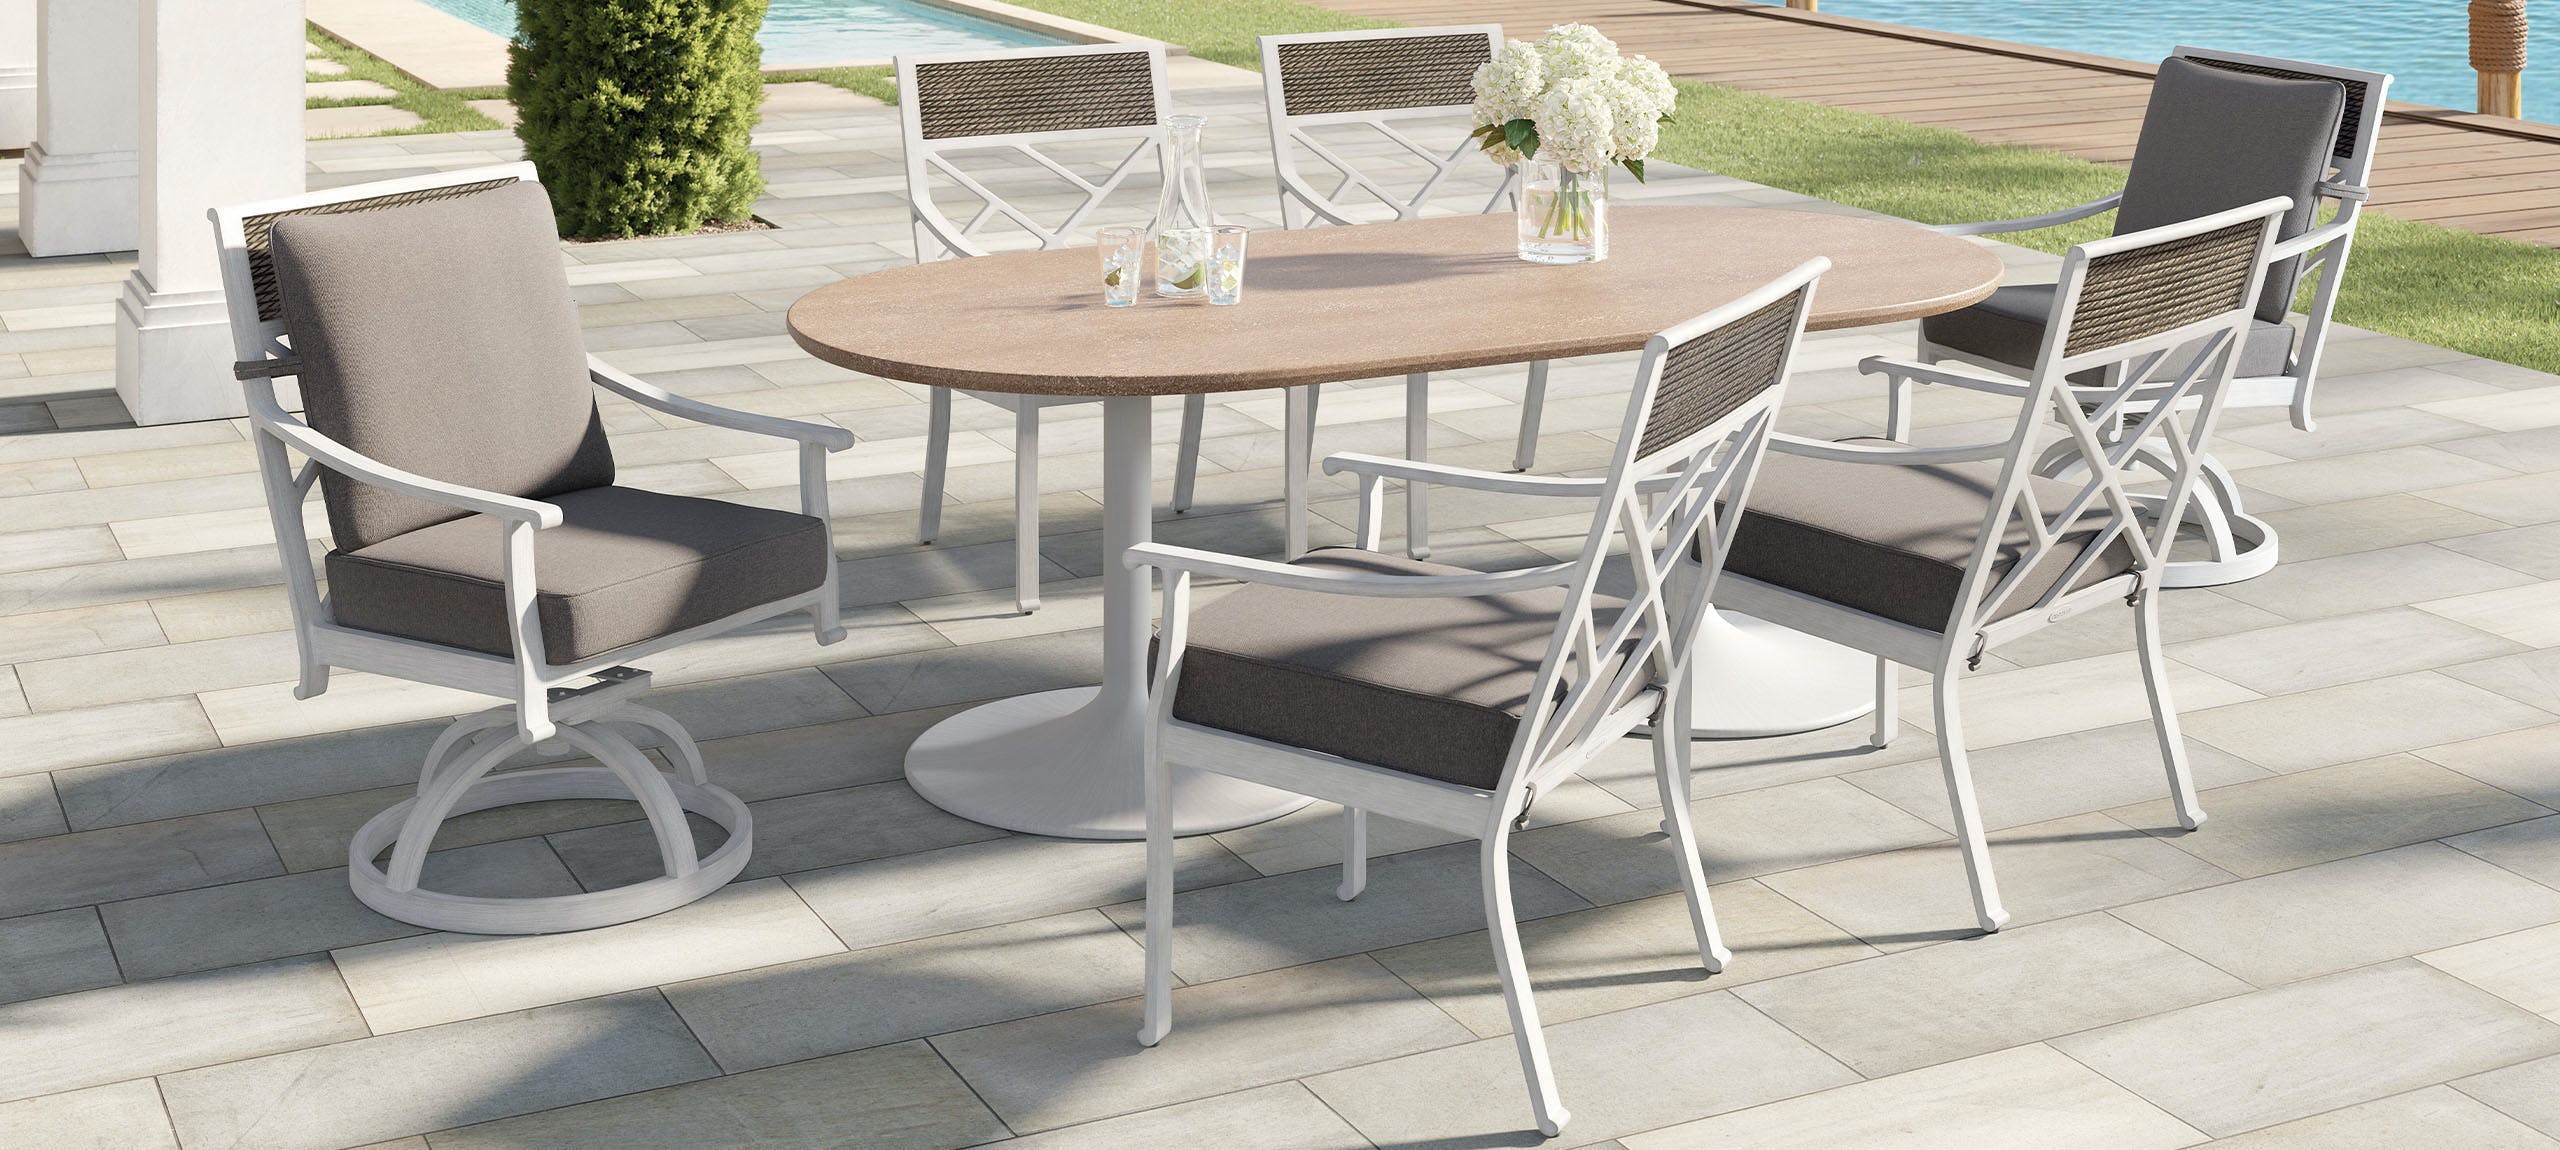 Korda Cushion Outdoor Dining Set for 6 By Castelle